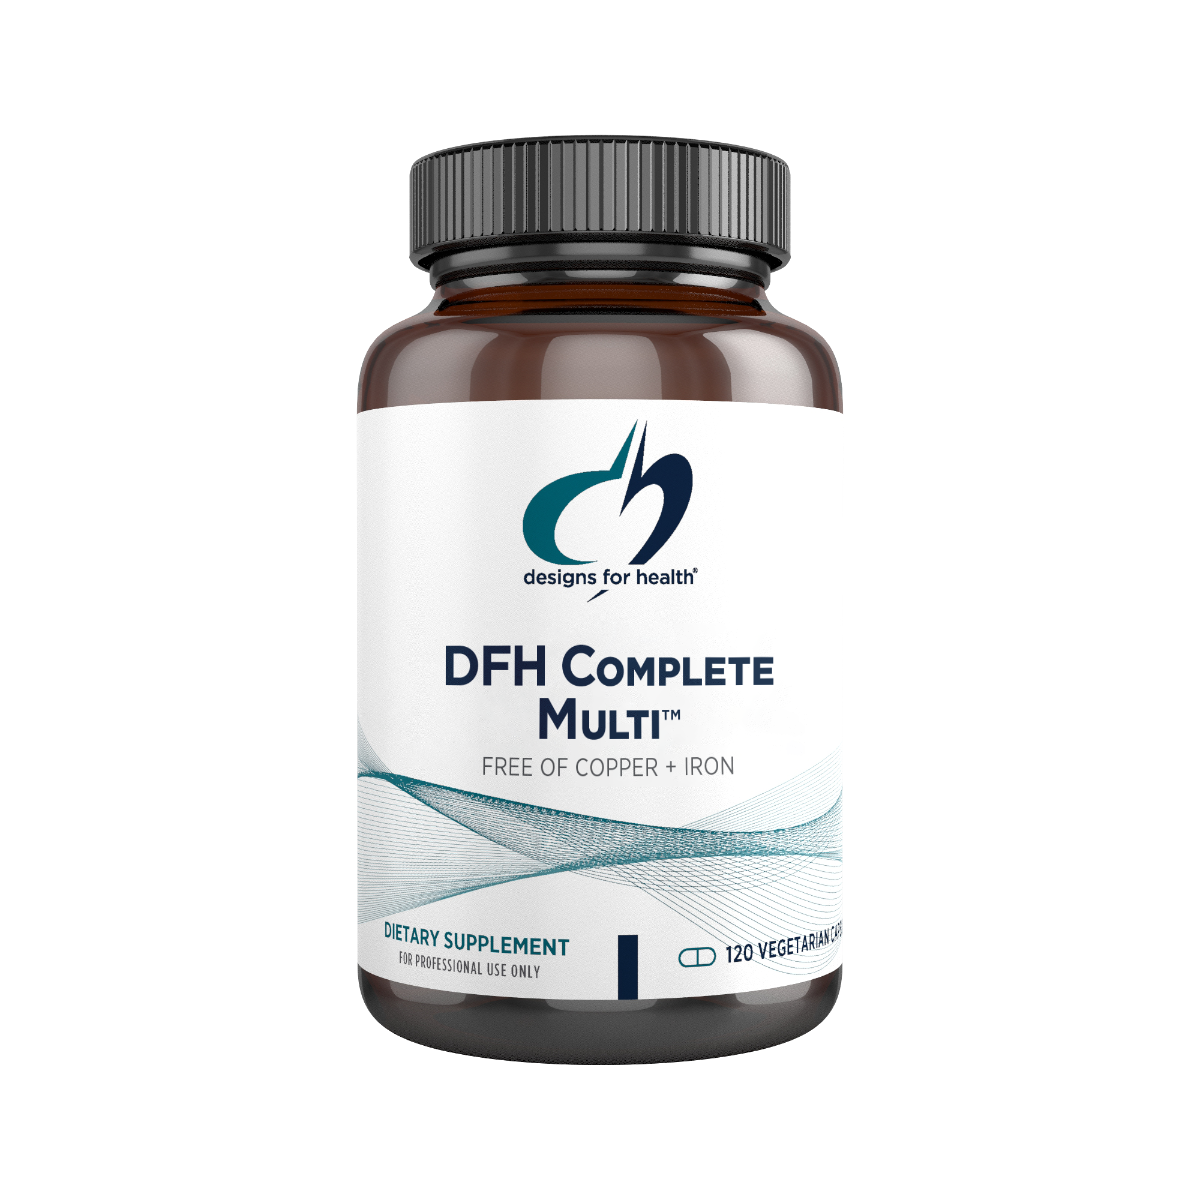 DFH Complete Multi™ (Free of Copper and Iron)